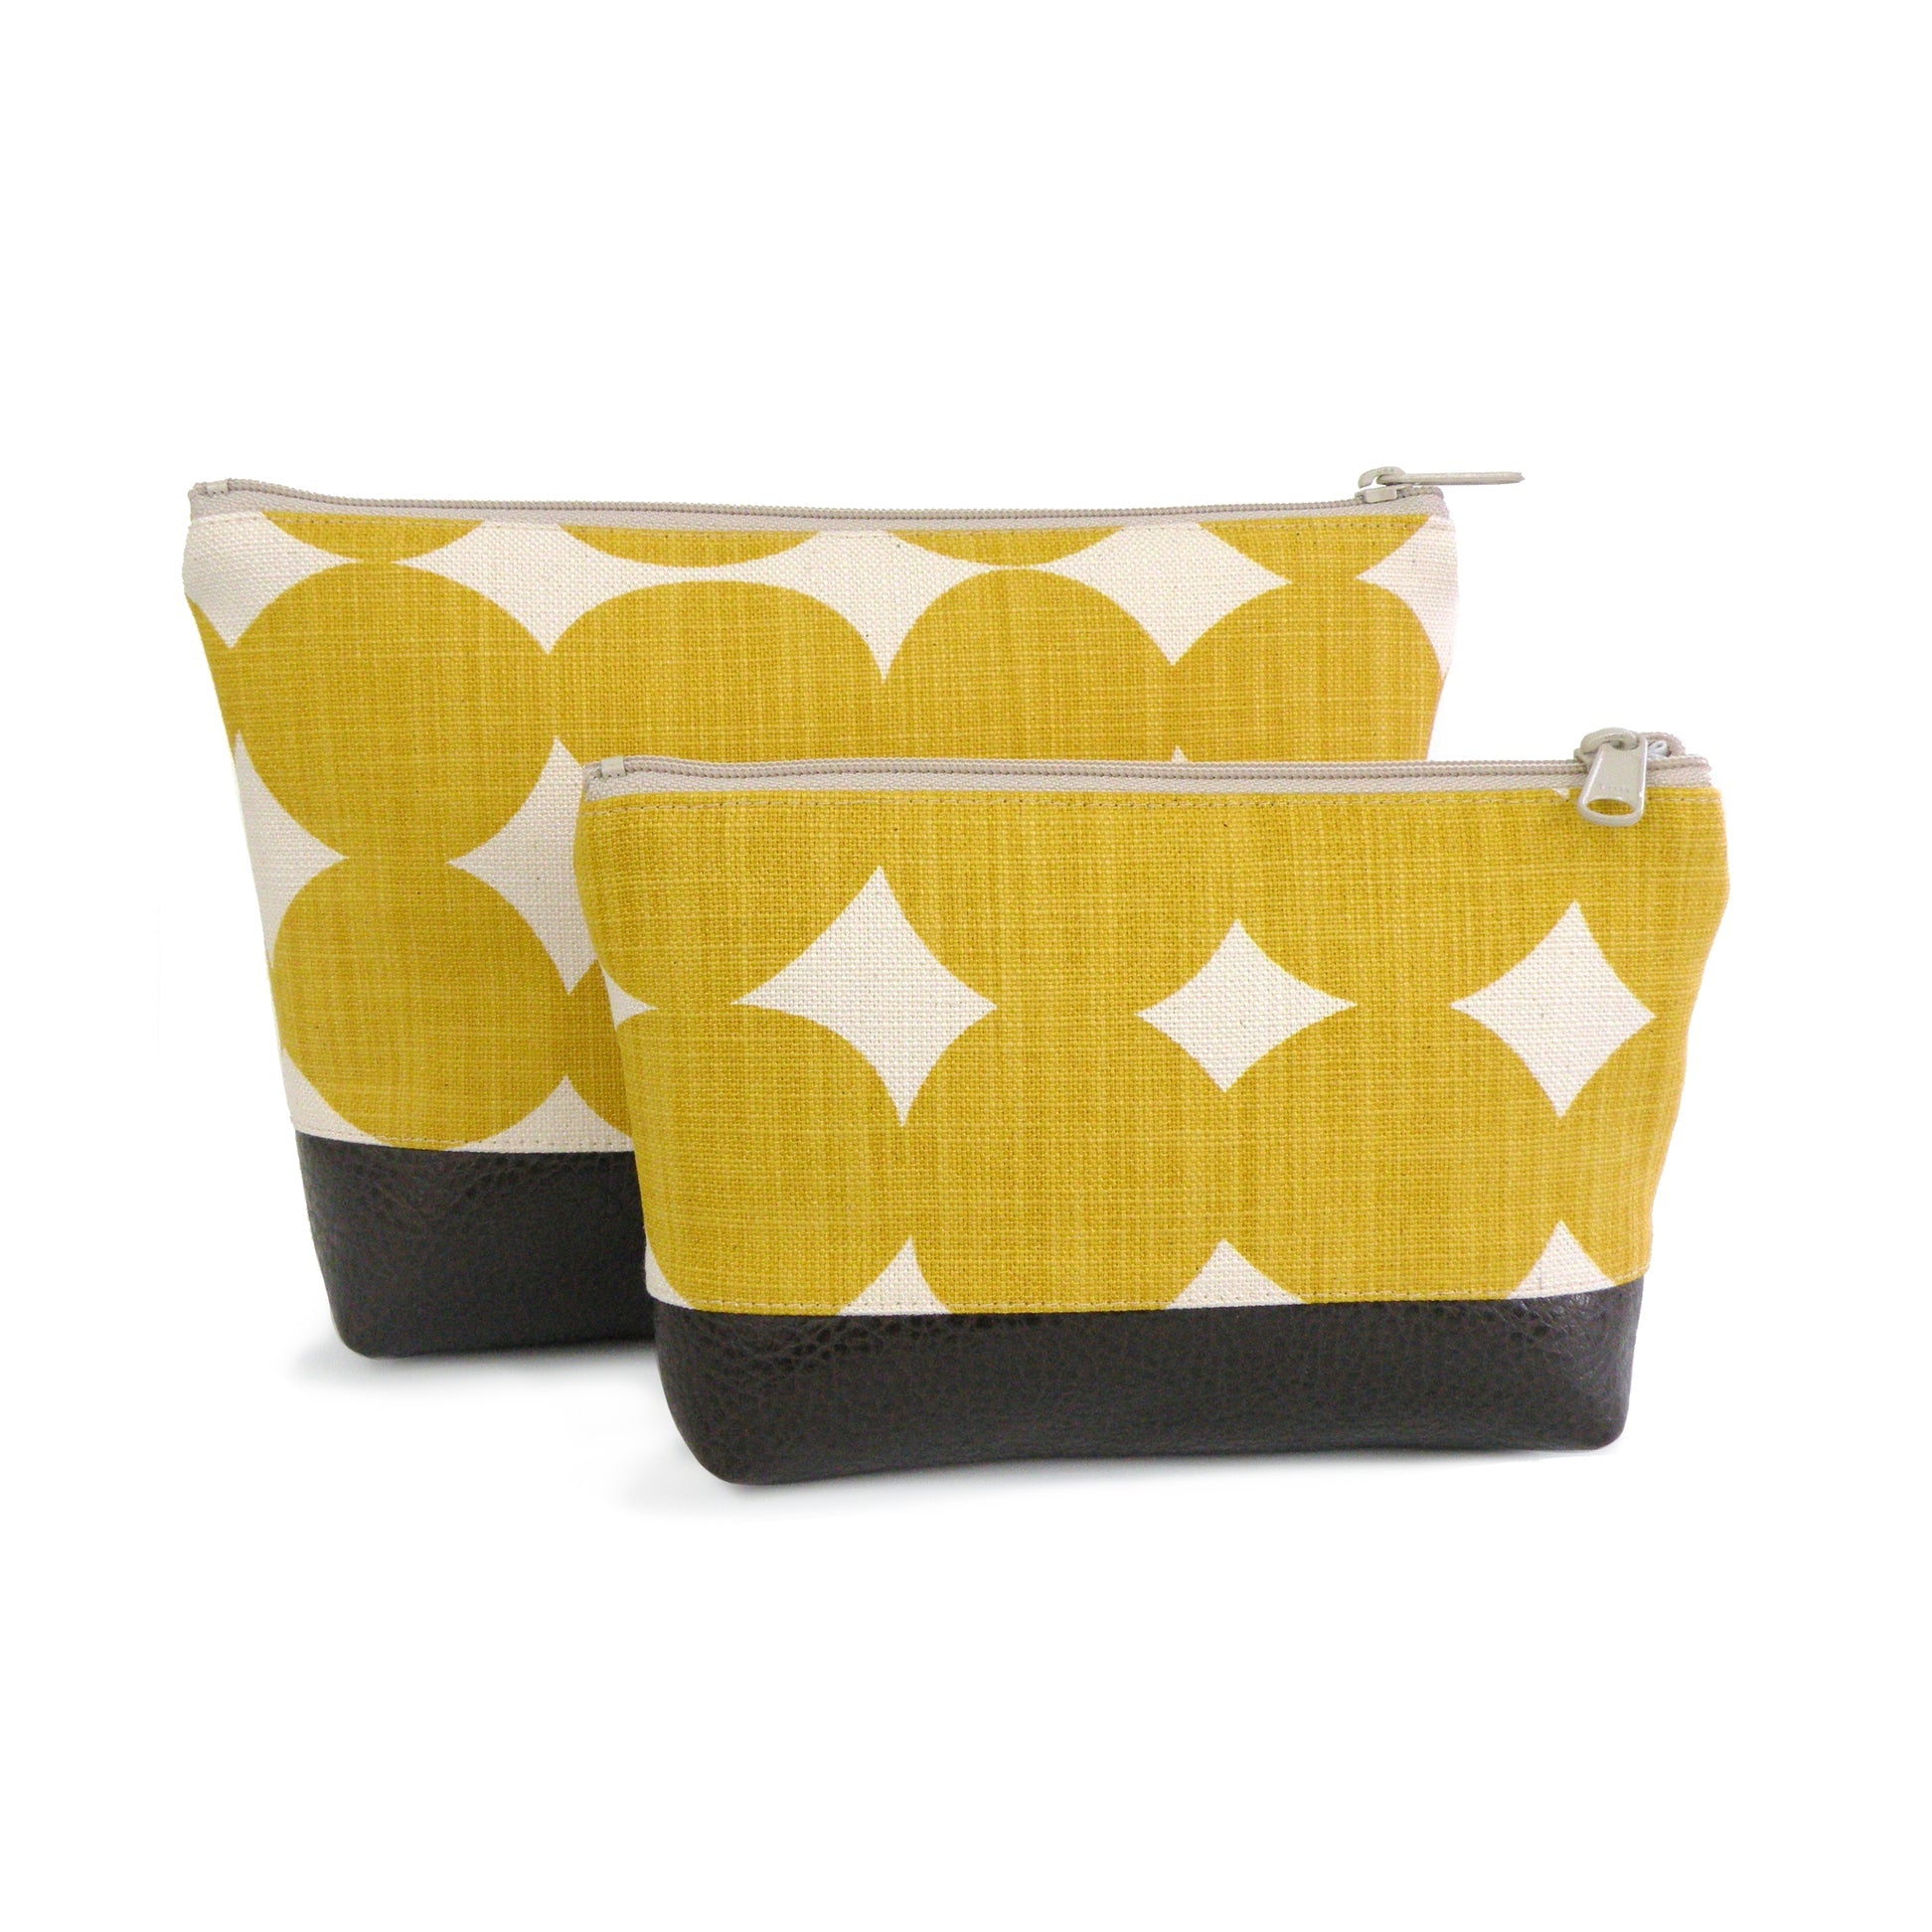 Small Cosmetic Clutch in Yellow Dots